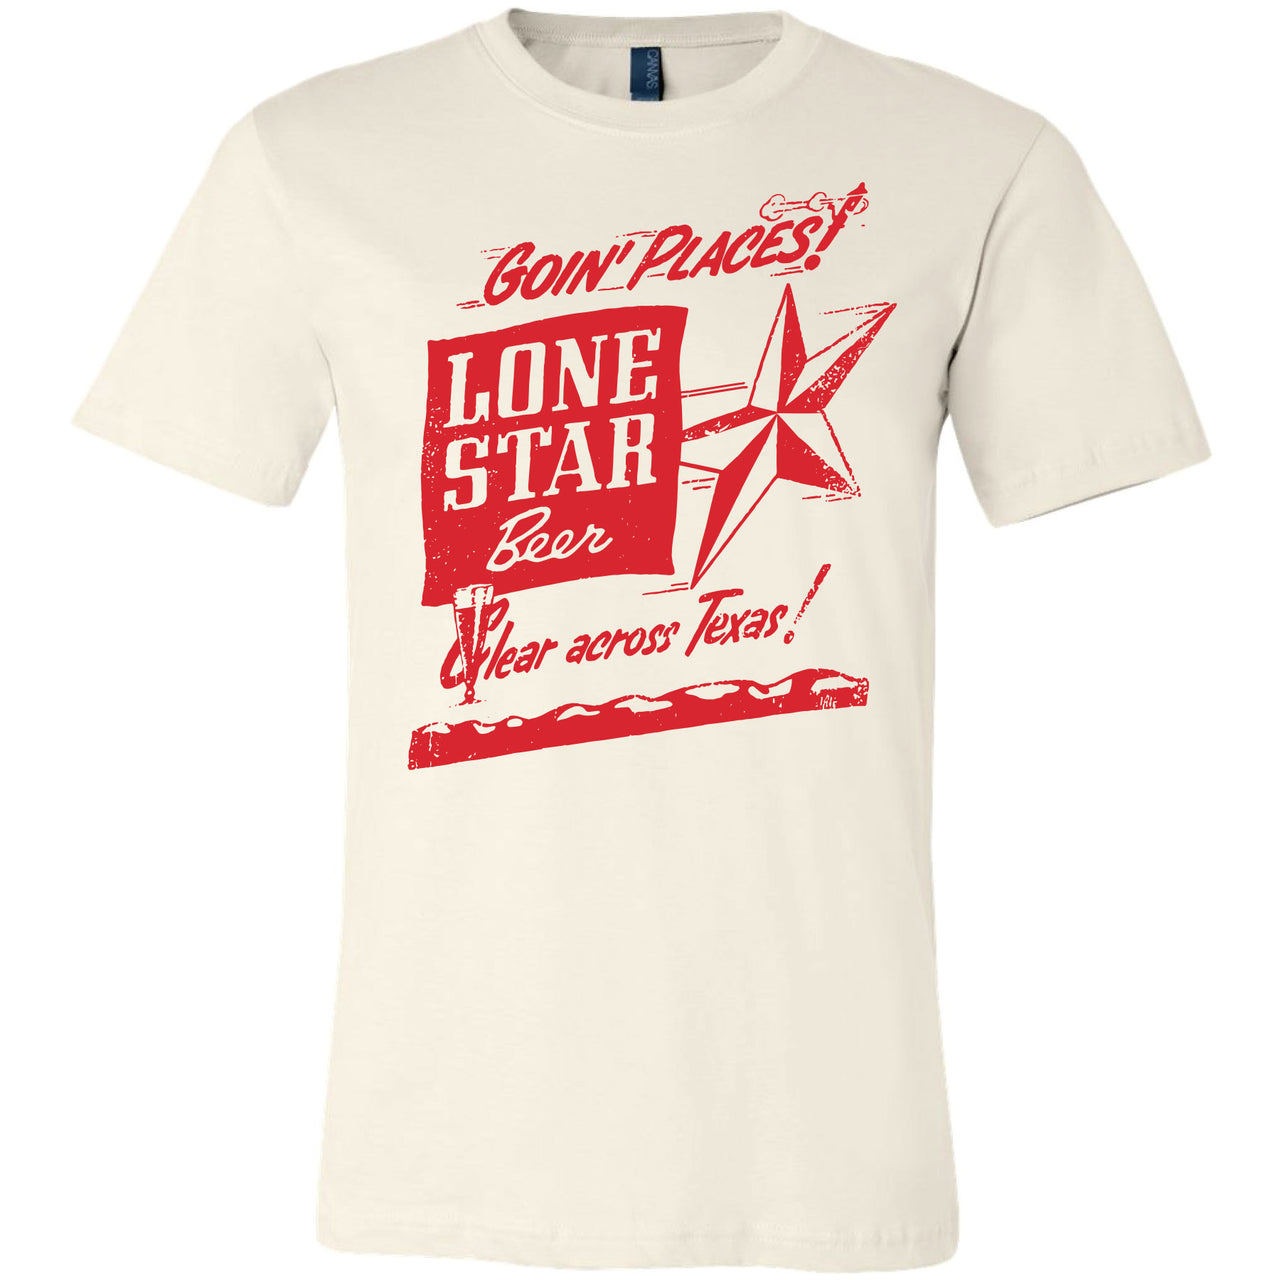 Lone Star - Goin' Places T-shirt